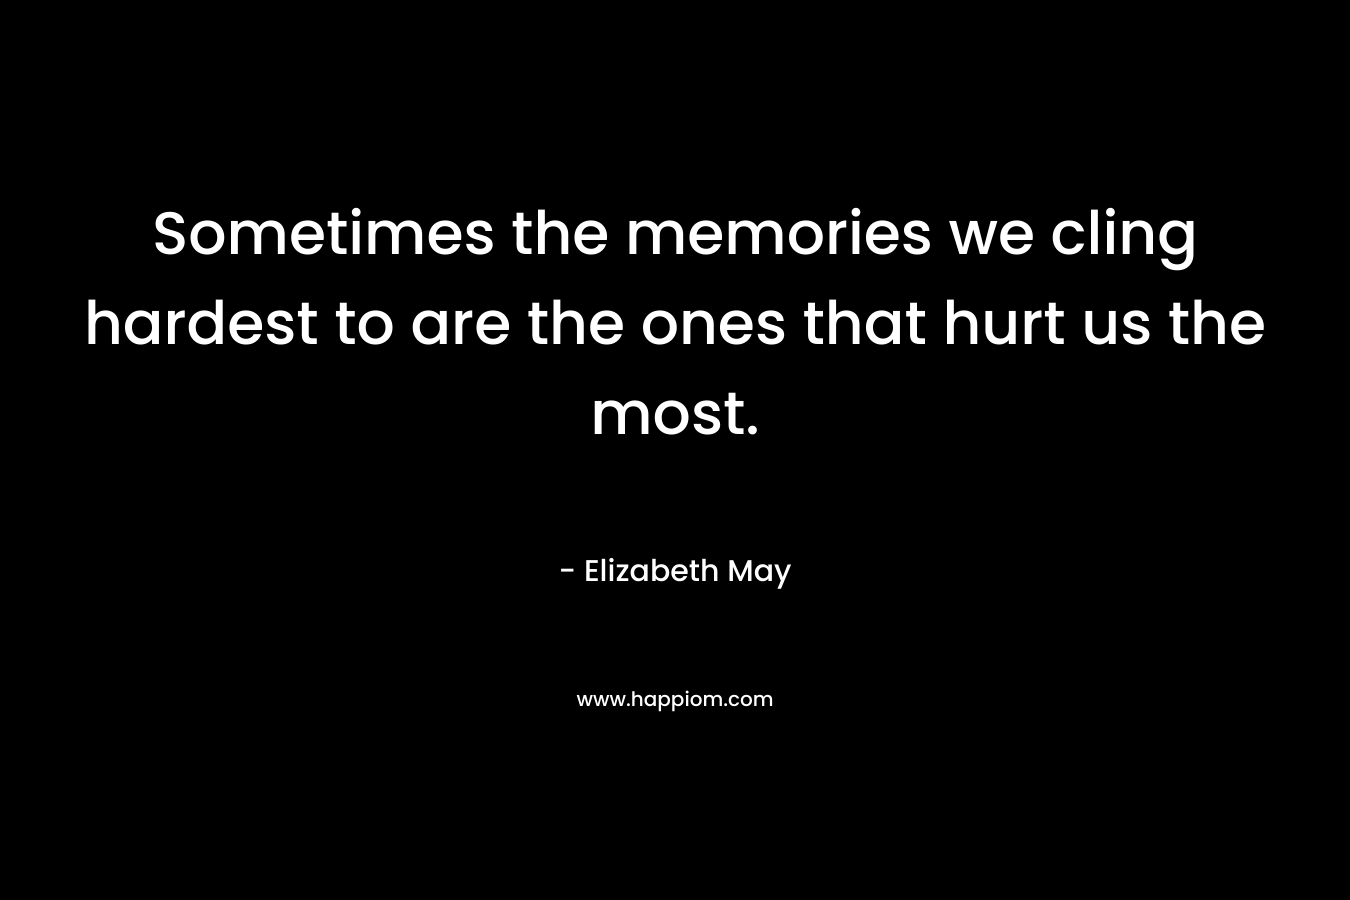 Sometimes the memories we cling hardest to are the ones that hurt us the most.